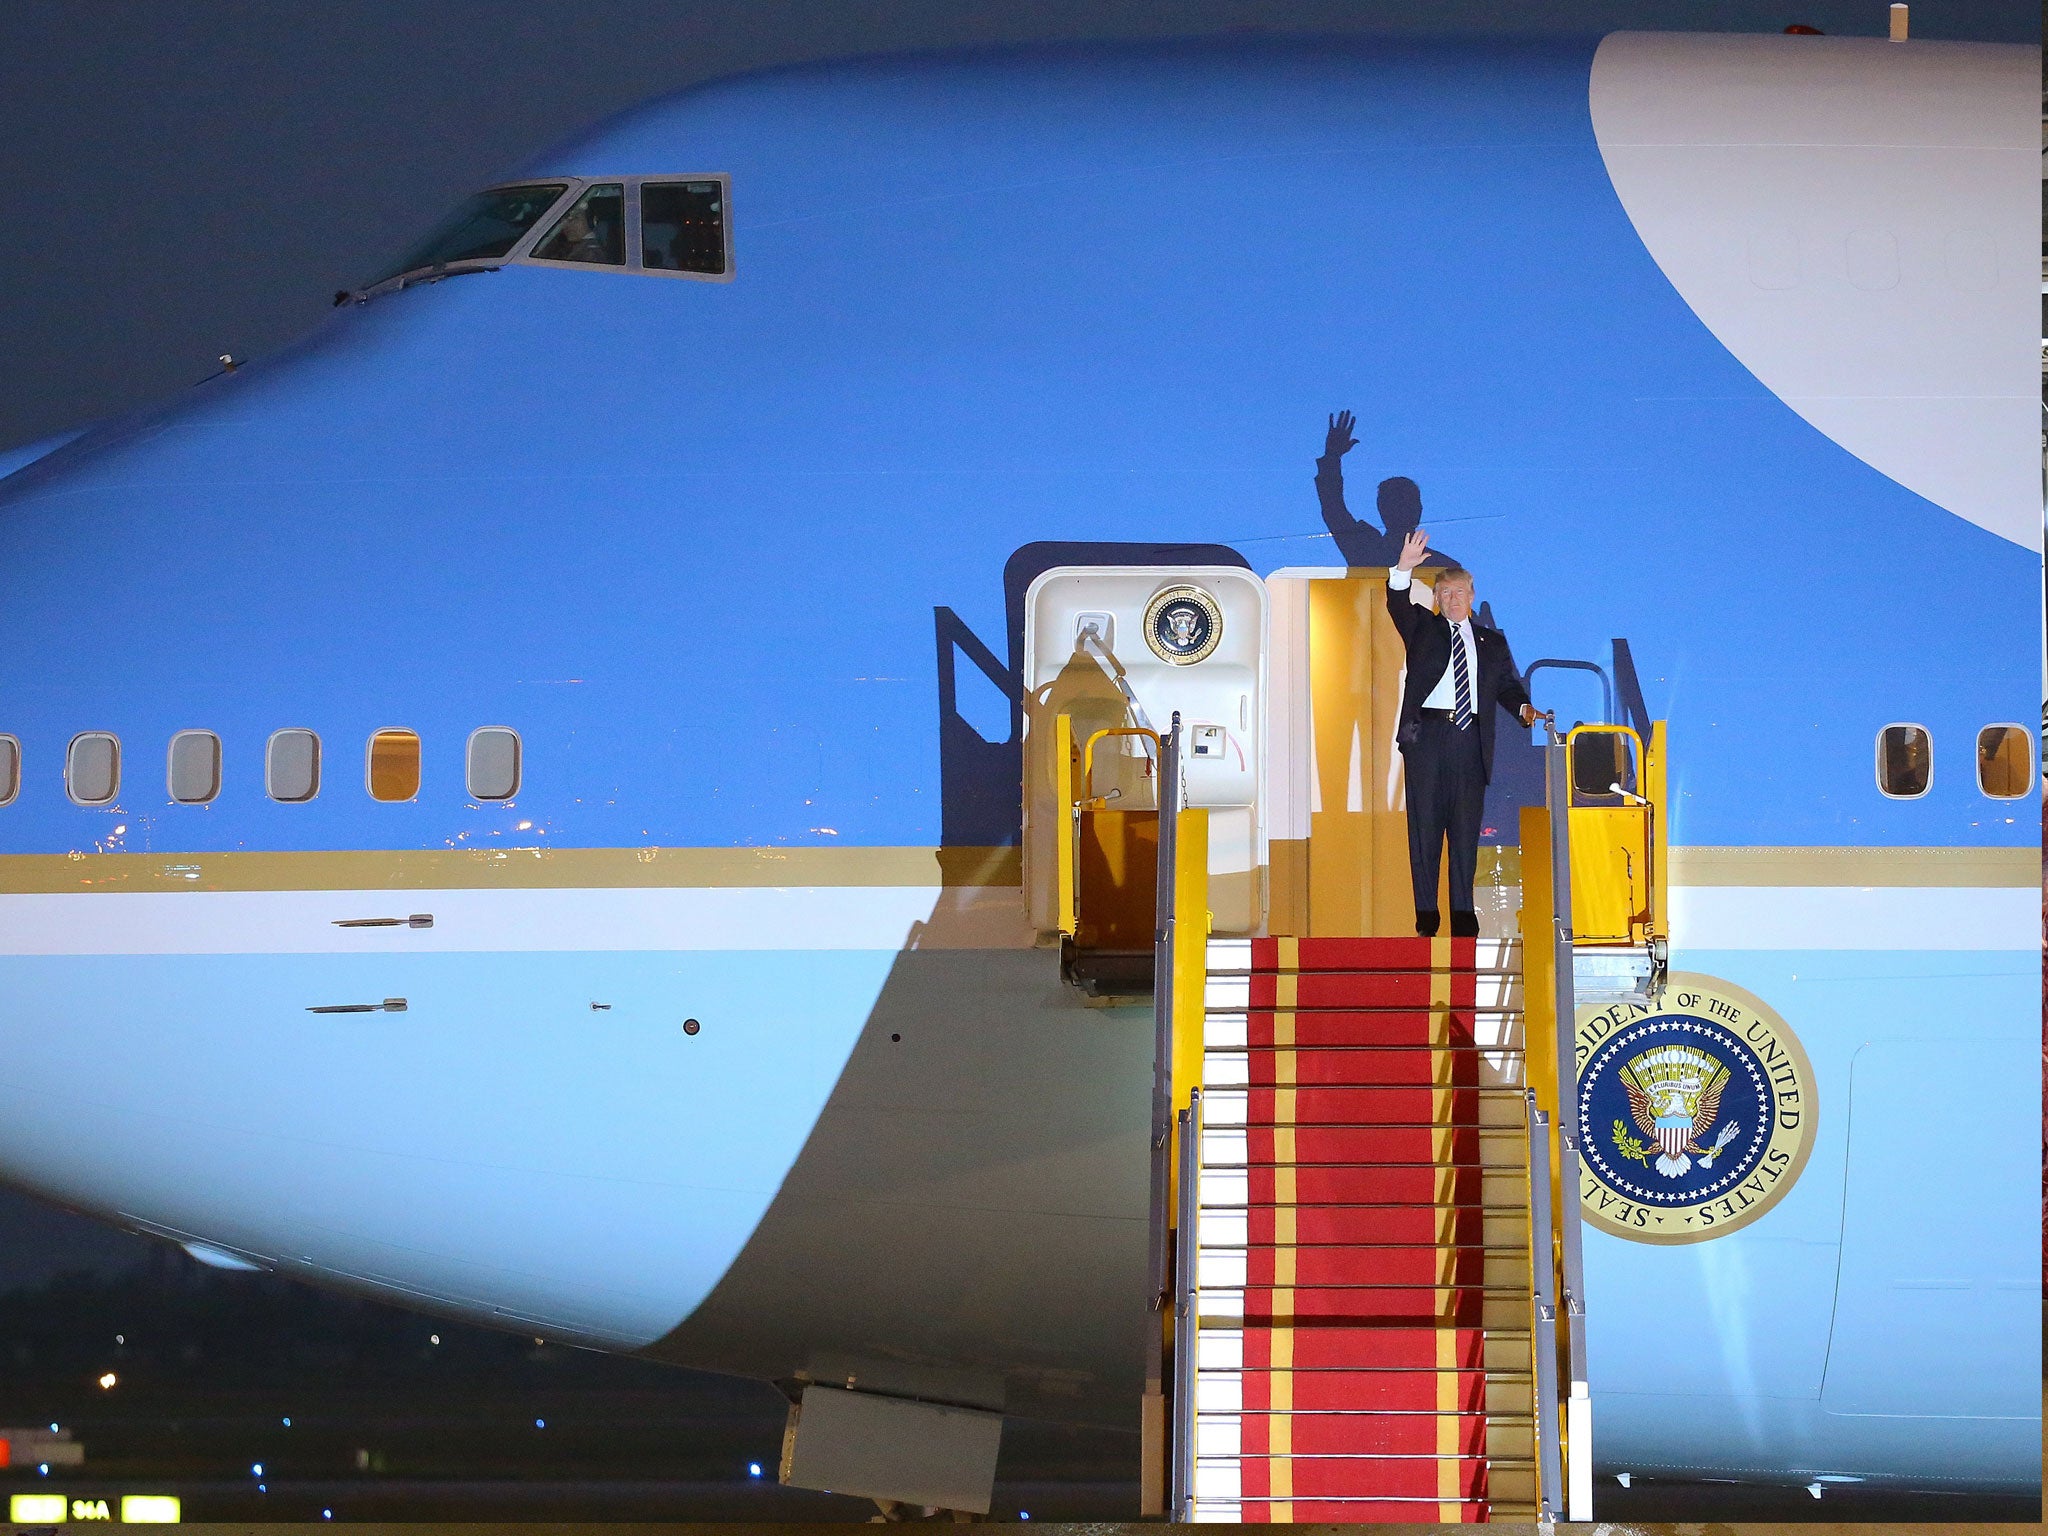 Donald Trump waves from the door of Air Force One plane as he arrives at Noi Bai International Airpot in Hanoi, Vietnam